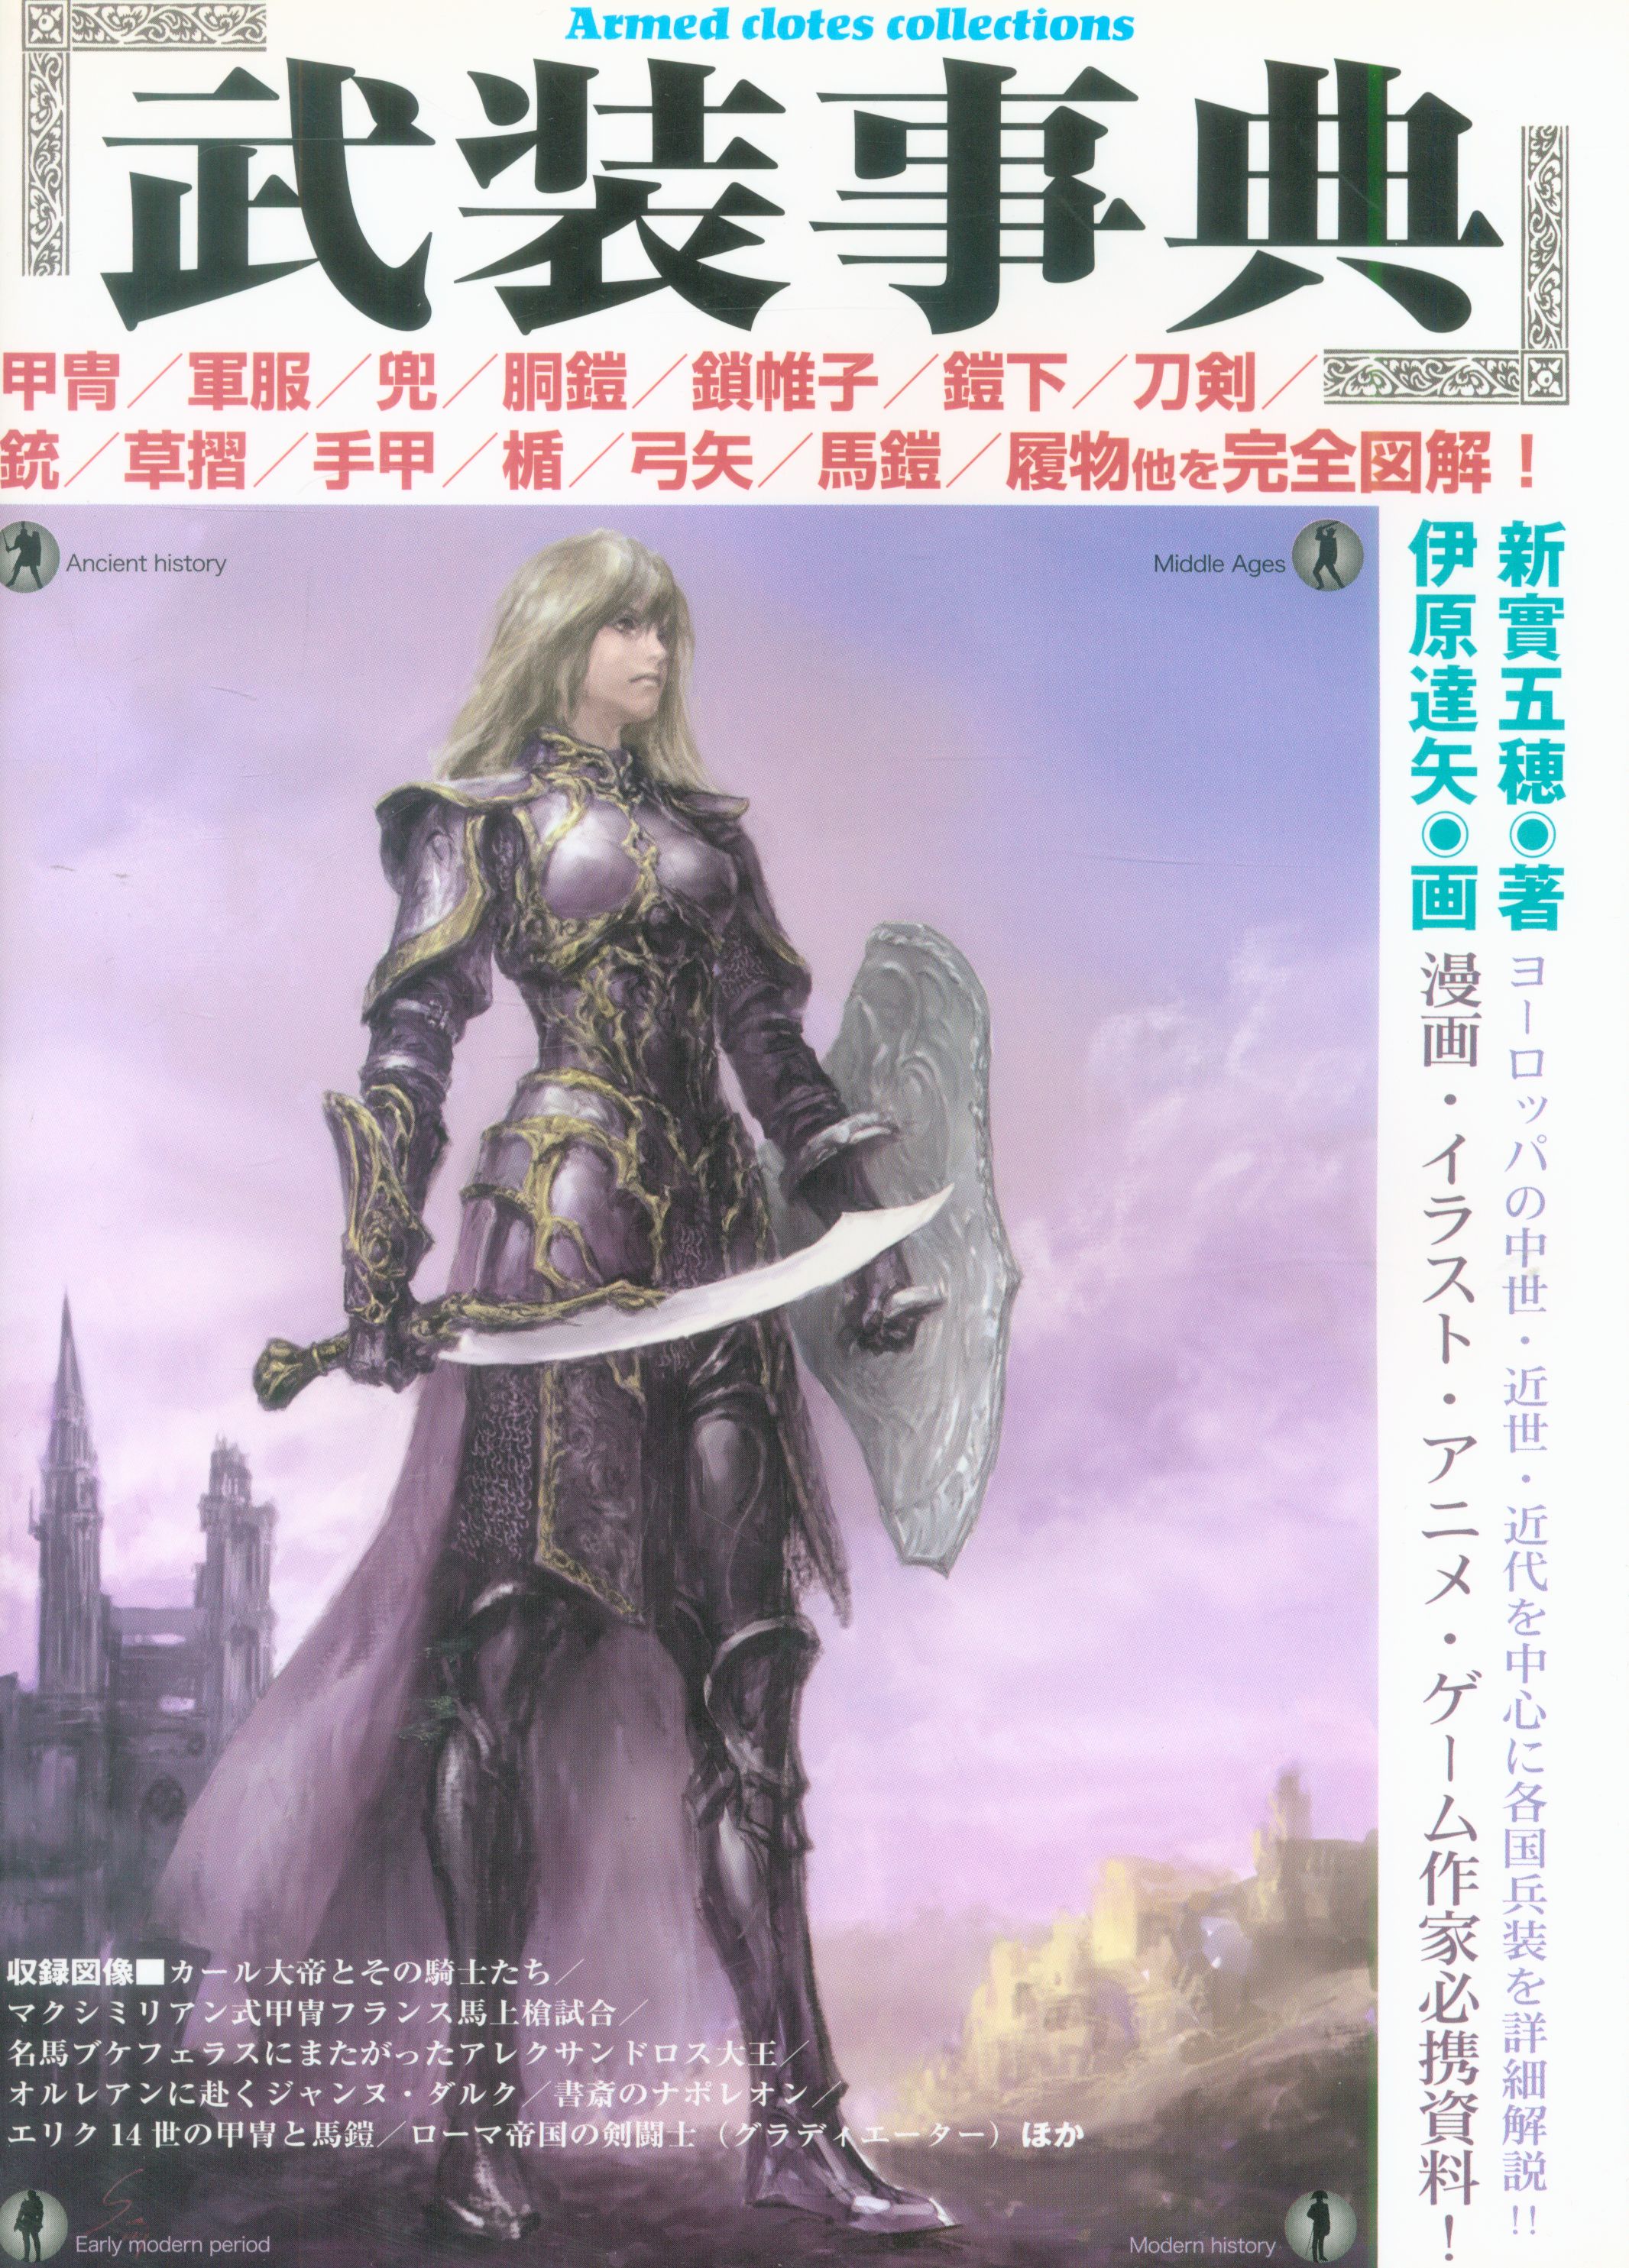 Armed Encyclopedia Covers the armament of medieval, early modern, modern  armor, military uniforms, etc. in Europe !! | MANDARAKE 在线商店